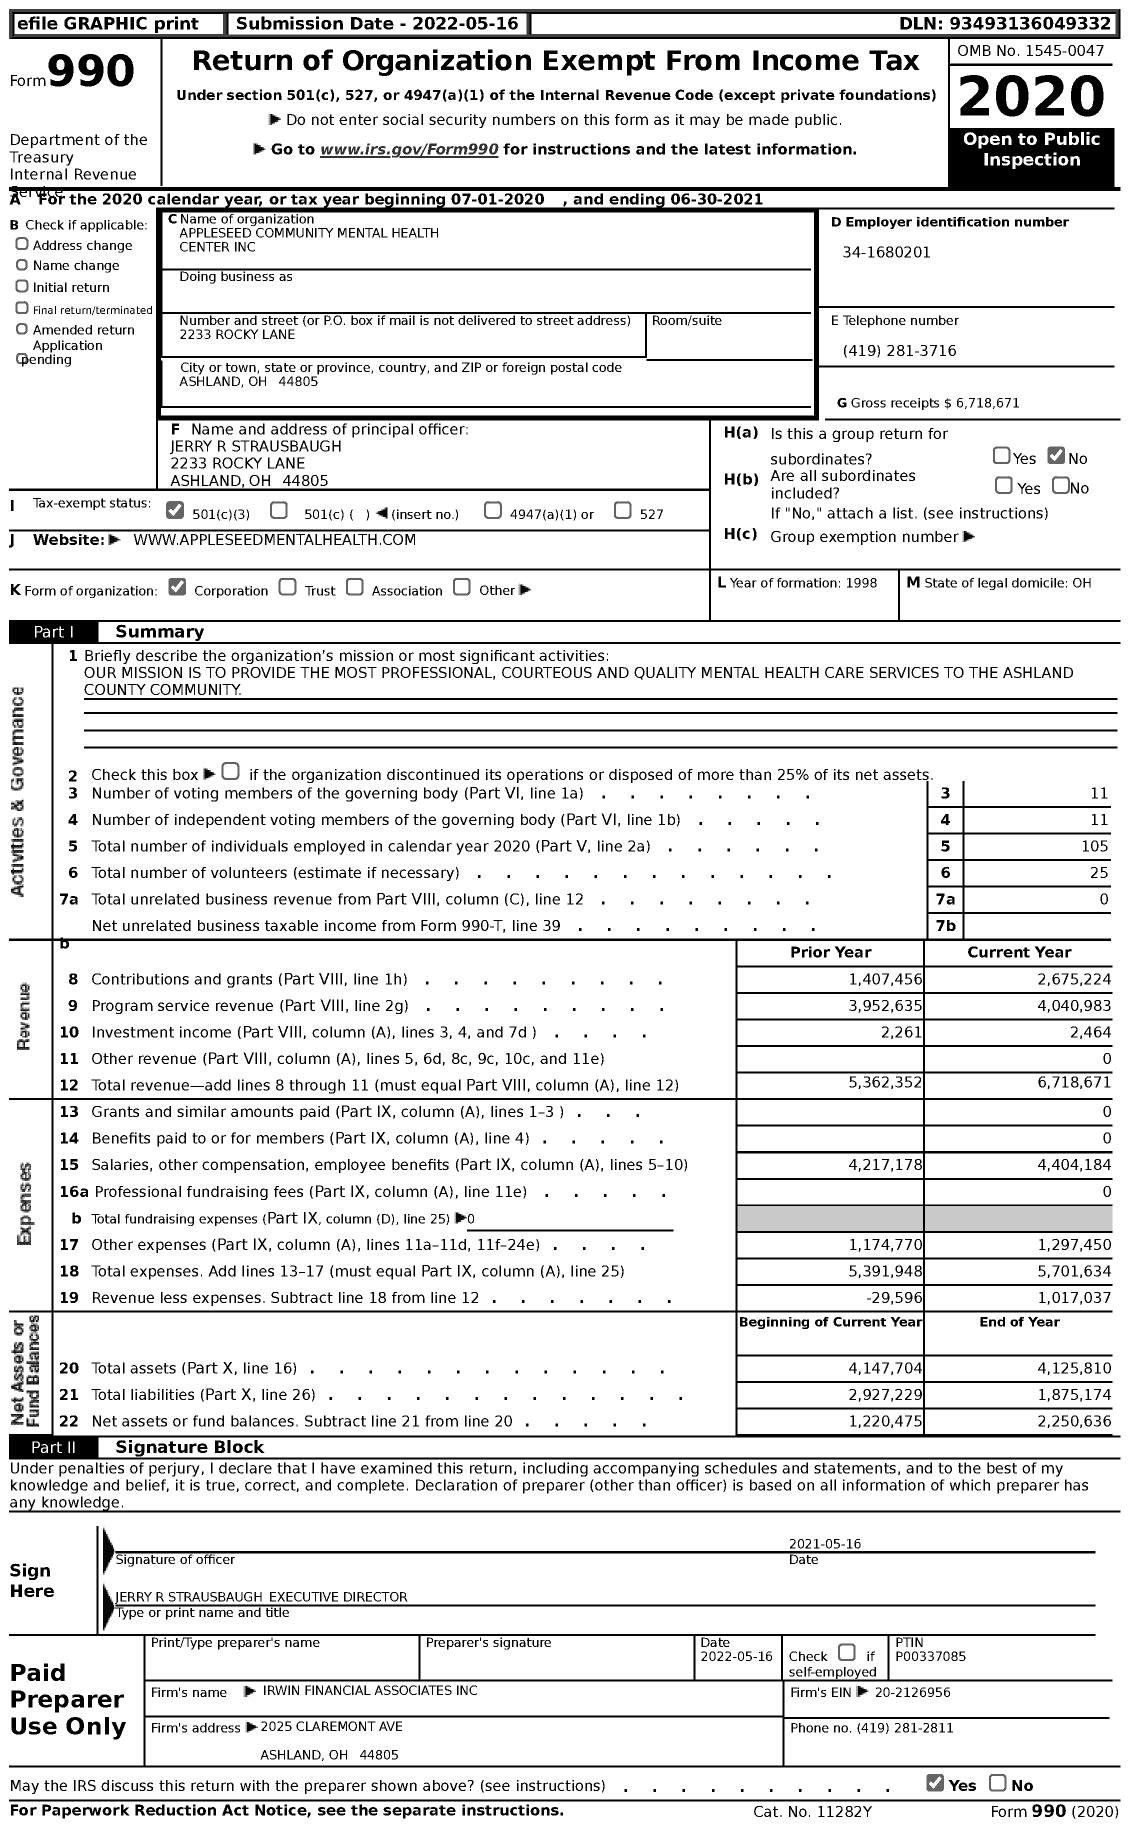 Image of first page of 2020 Form 990 for Appleseed Community Mental Health Center